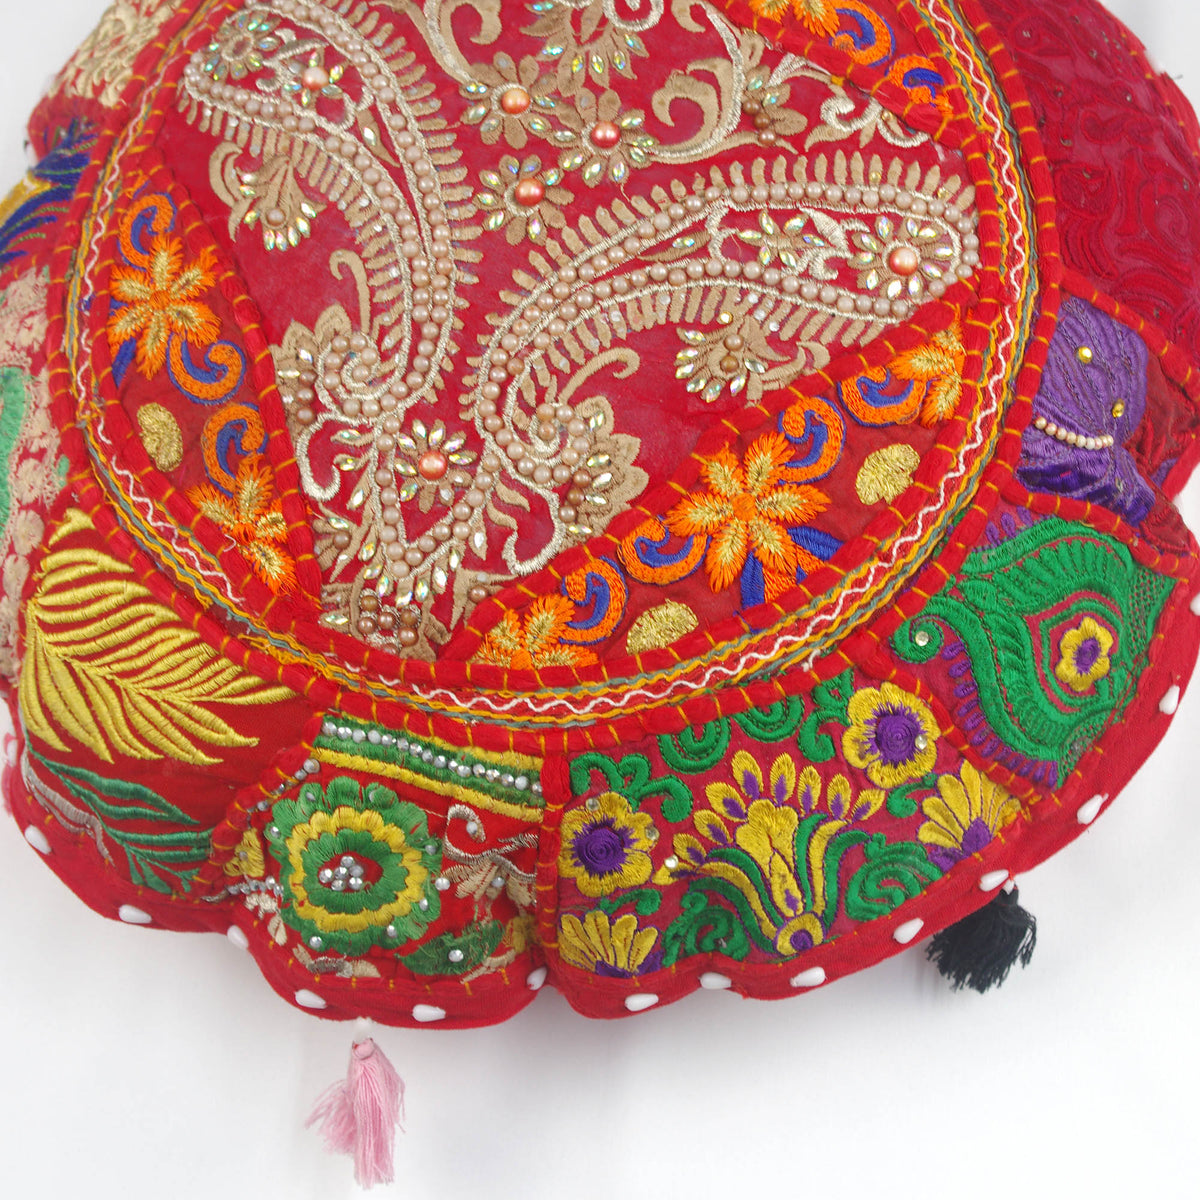 Red Beaded Paisley Round Floor Embroidered Patchwork Pouf Ottoman Indian Vintage Cushion Cover 18"